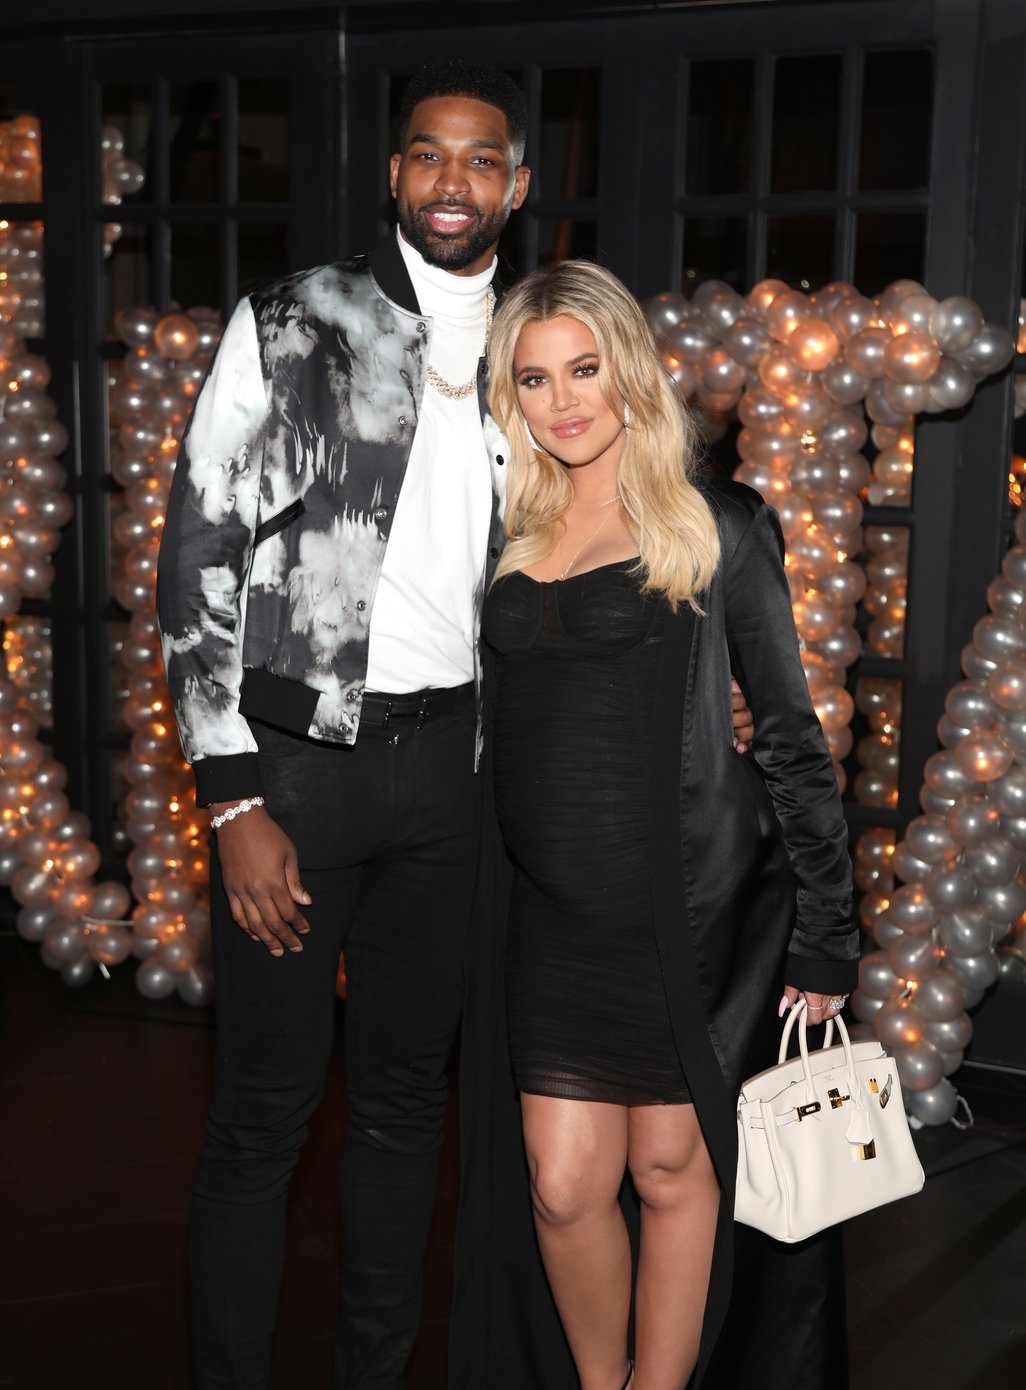 Tristan Thompson and Khloé Kardashian celebrate Tristan Thompson's Birthday at Beauty & Essex on March 10, 2018. | Source: Getty Images